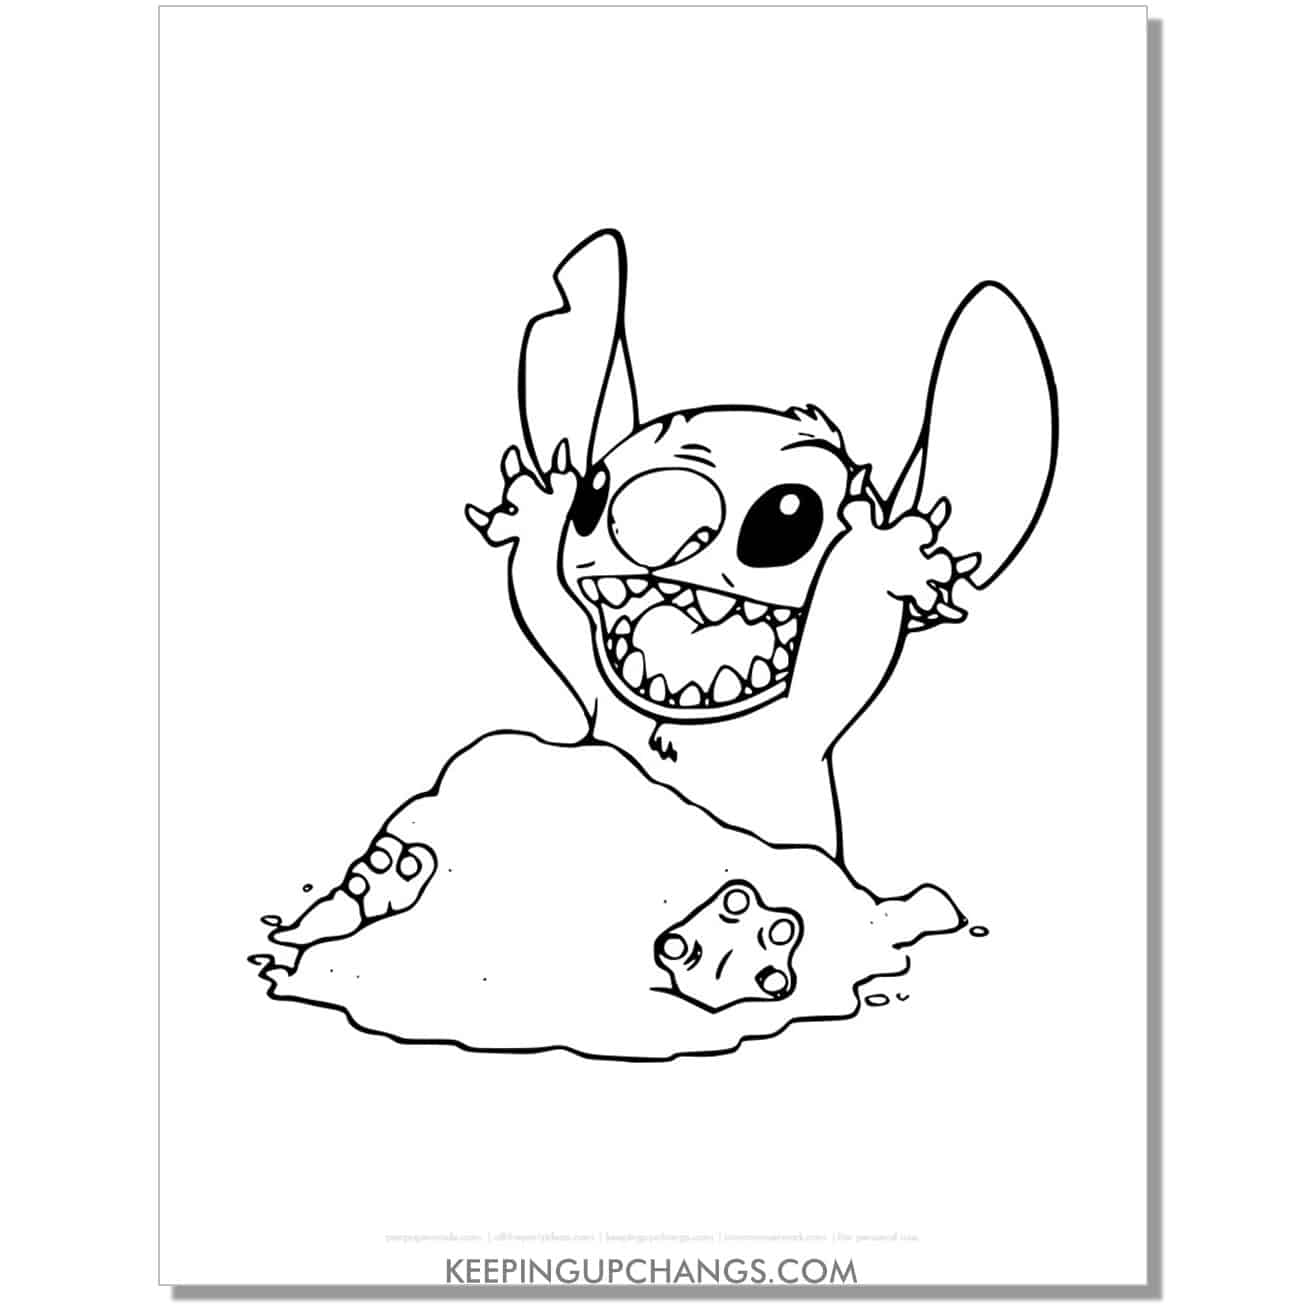 free stitch happy buried under beach sand coloring page.